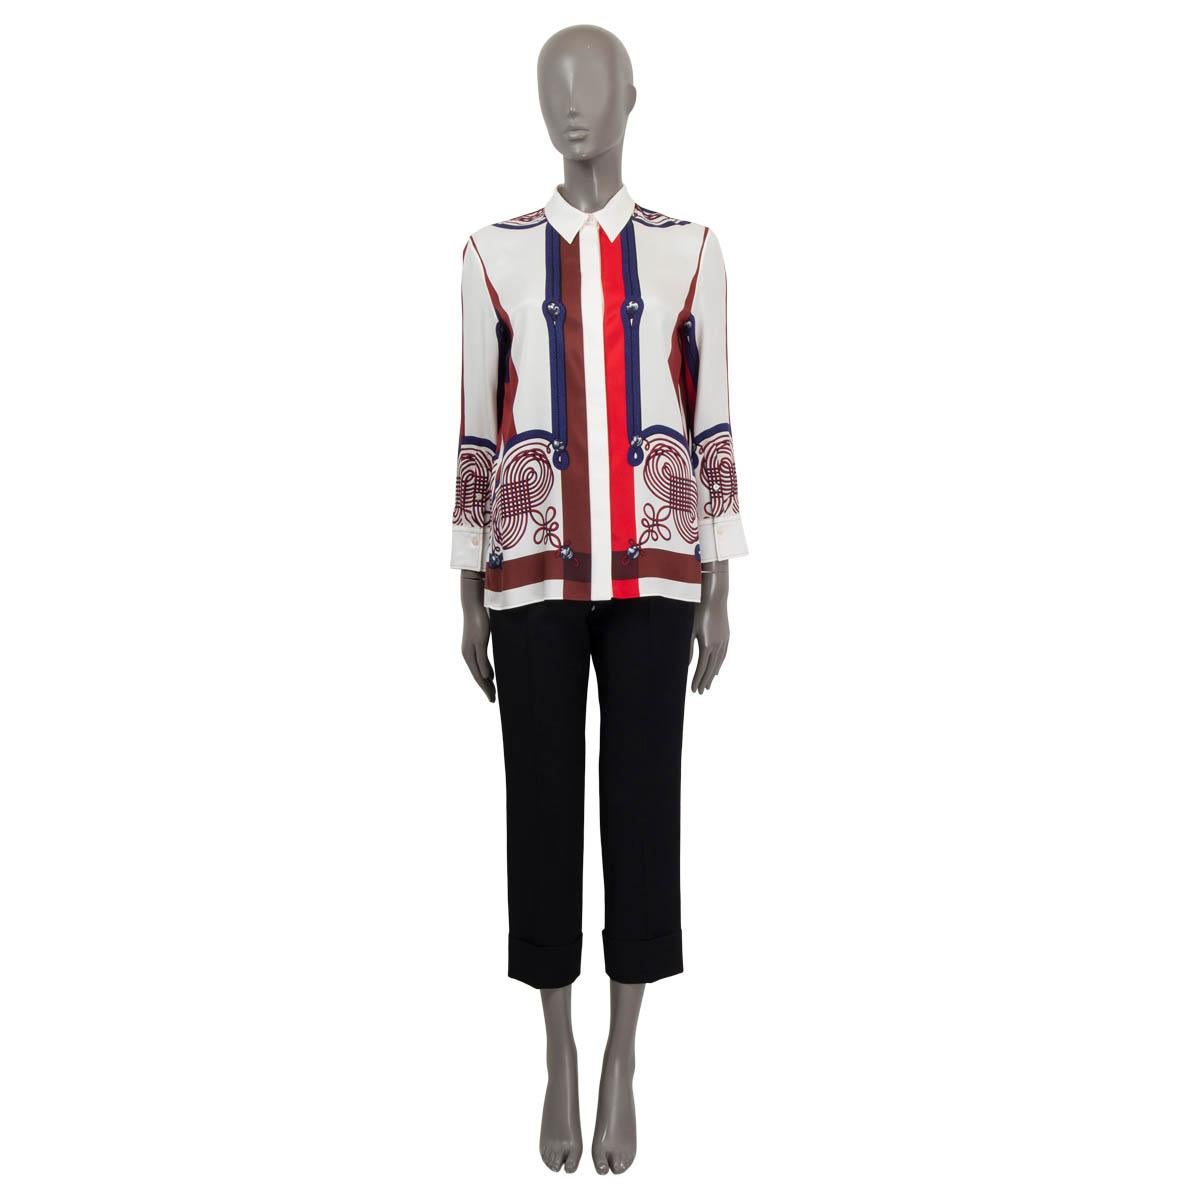 100% authentic Hermès Resort 2019 Brandebourgs Encoder button-up shirt in off-white, red, burgundy, blue and brown silk (100%). Features long sleeves and buttoned cuffs. Opens with concealed buttons on the front. Unlined. Has been worn once and is